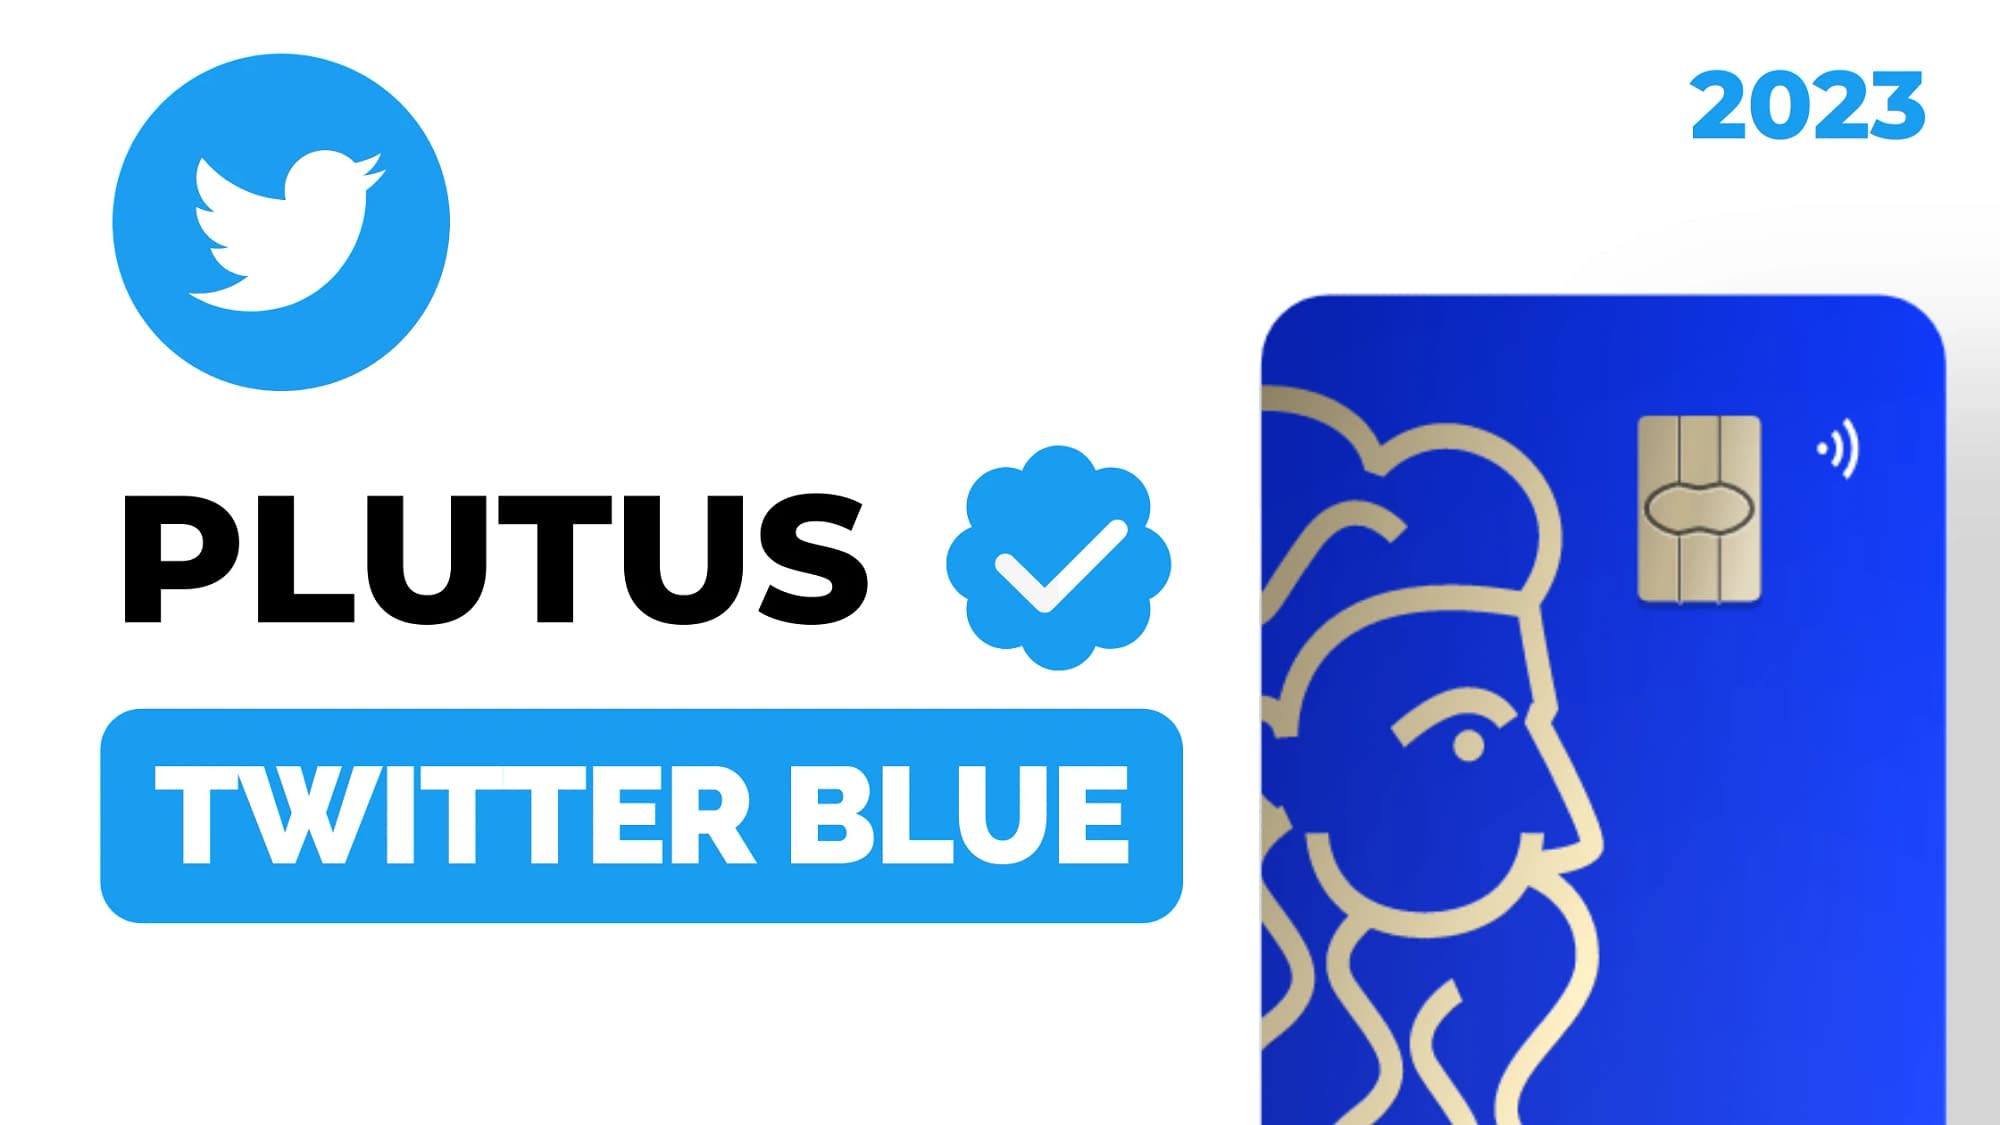 How to get Twitter Blue for free using Plutus (2023)